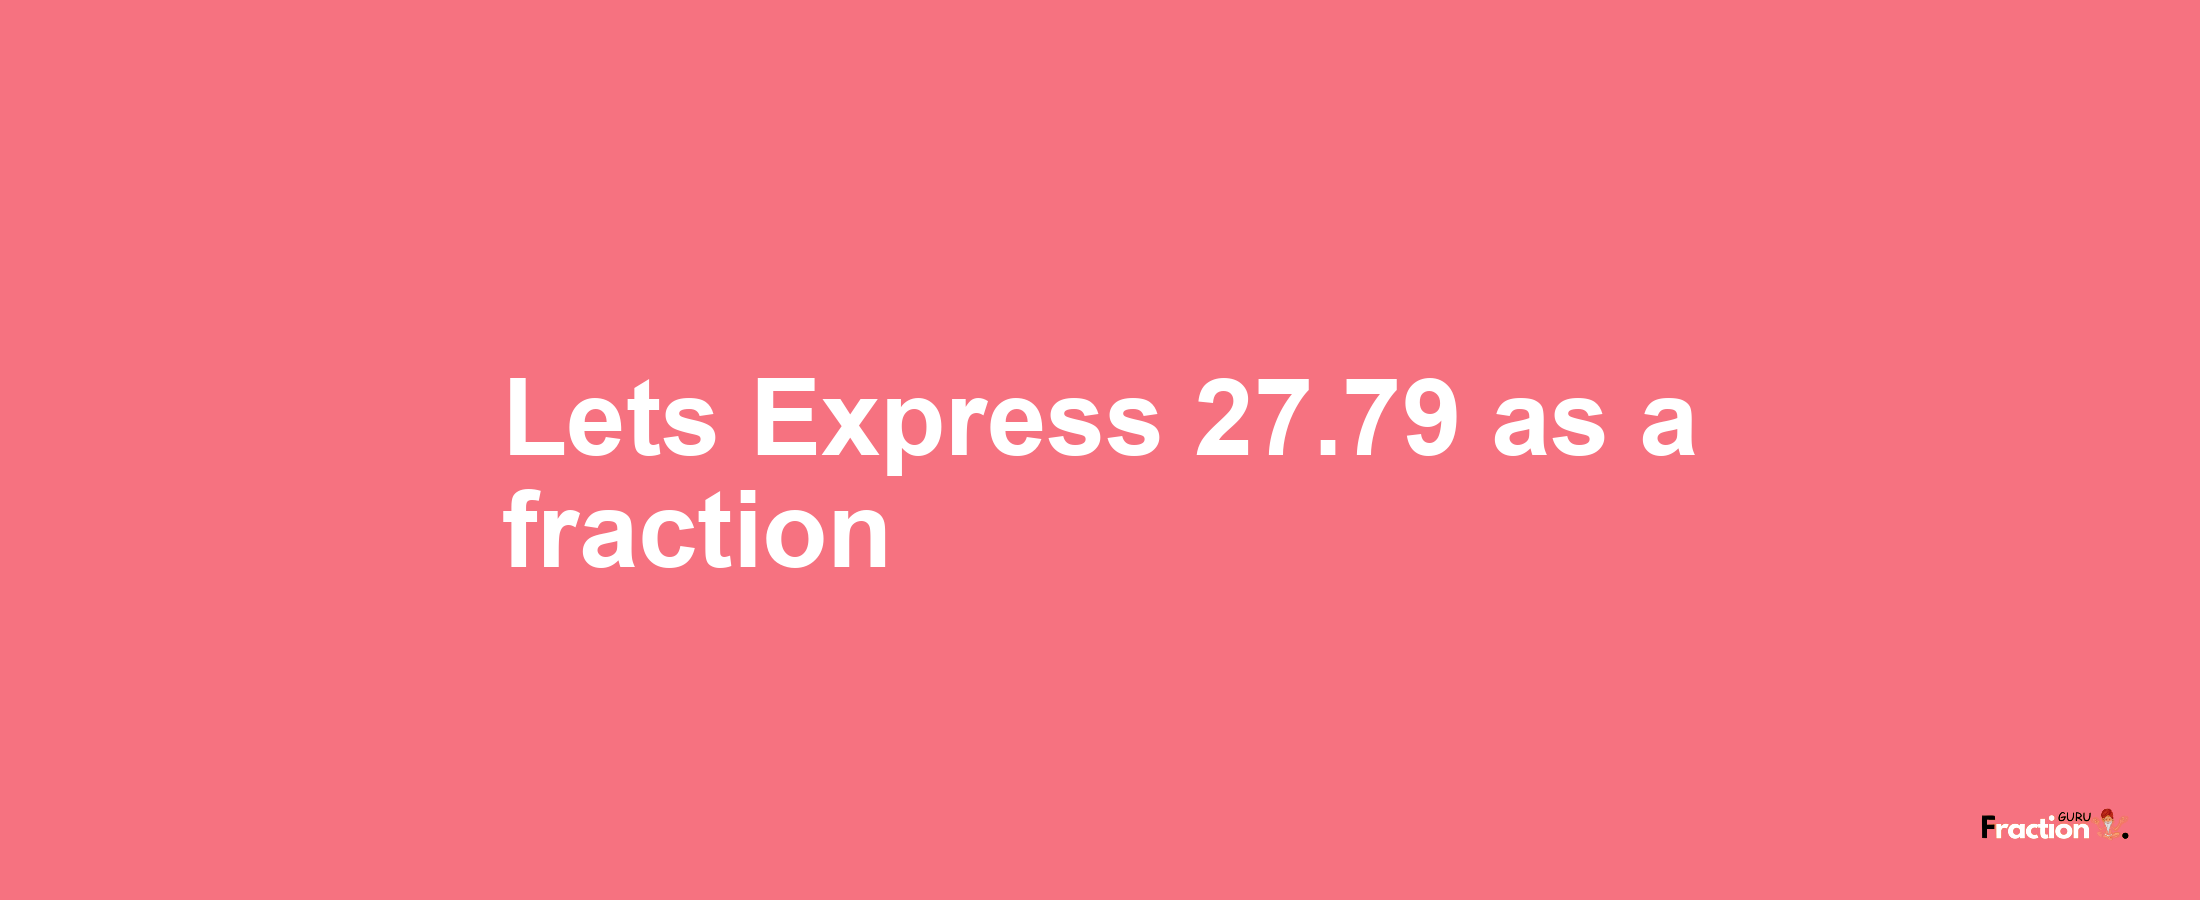 Lets Express 27.79 as afraction